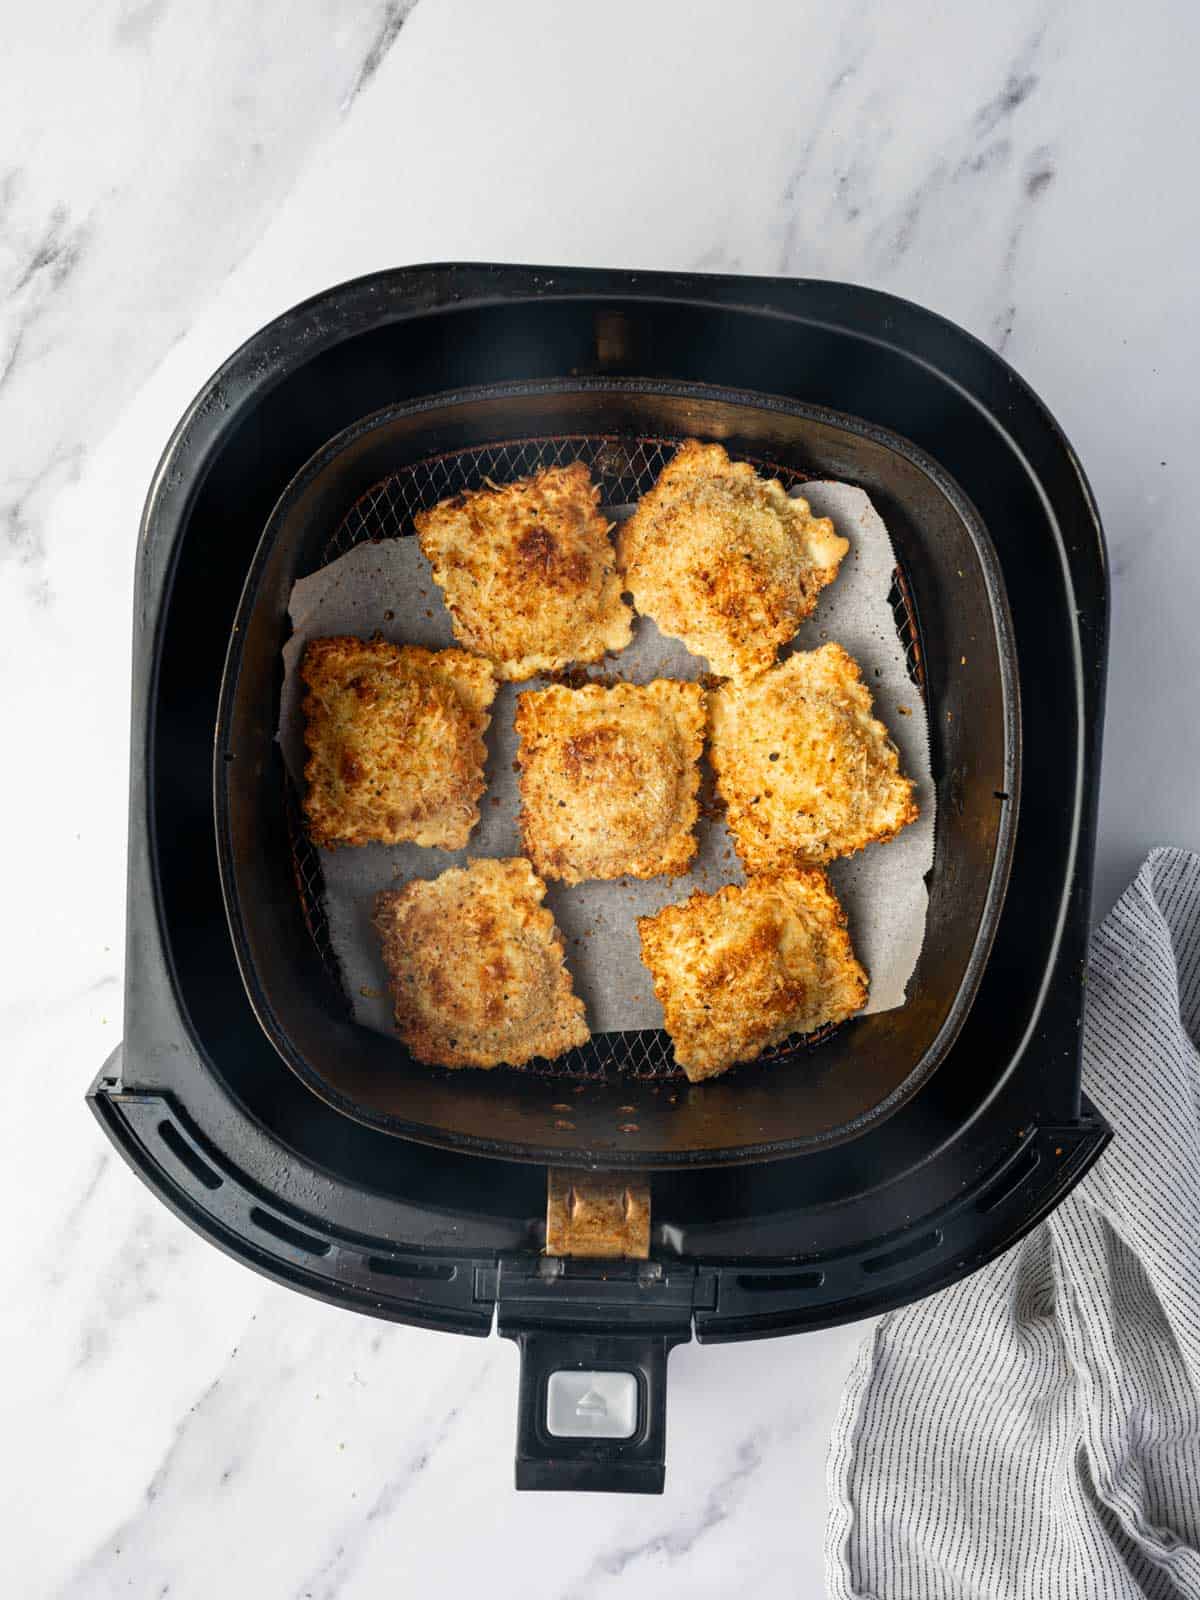 Air fryer basket with a single layer of air fried ravioli.